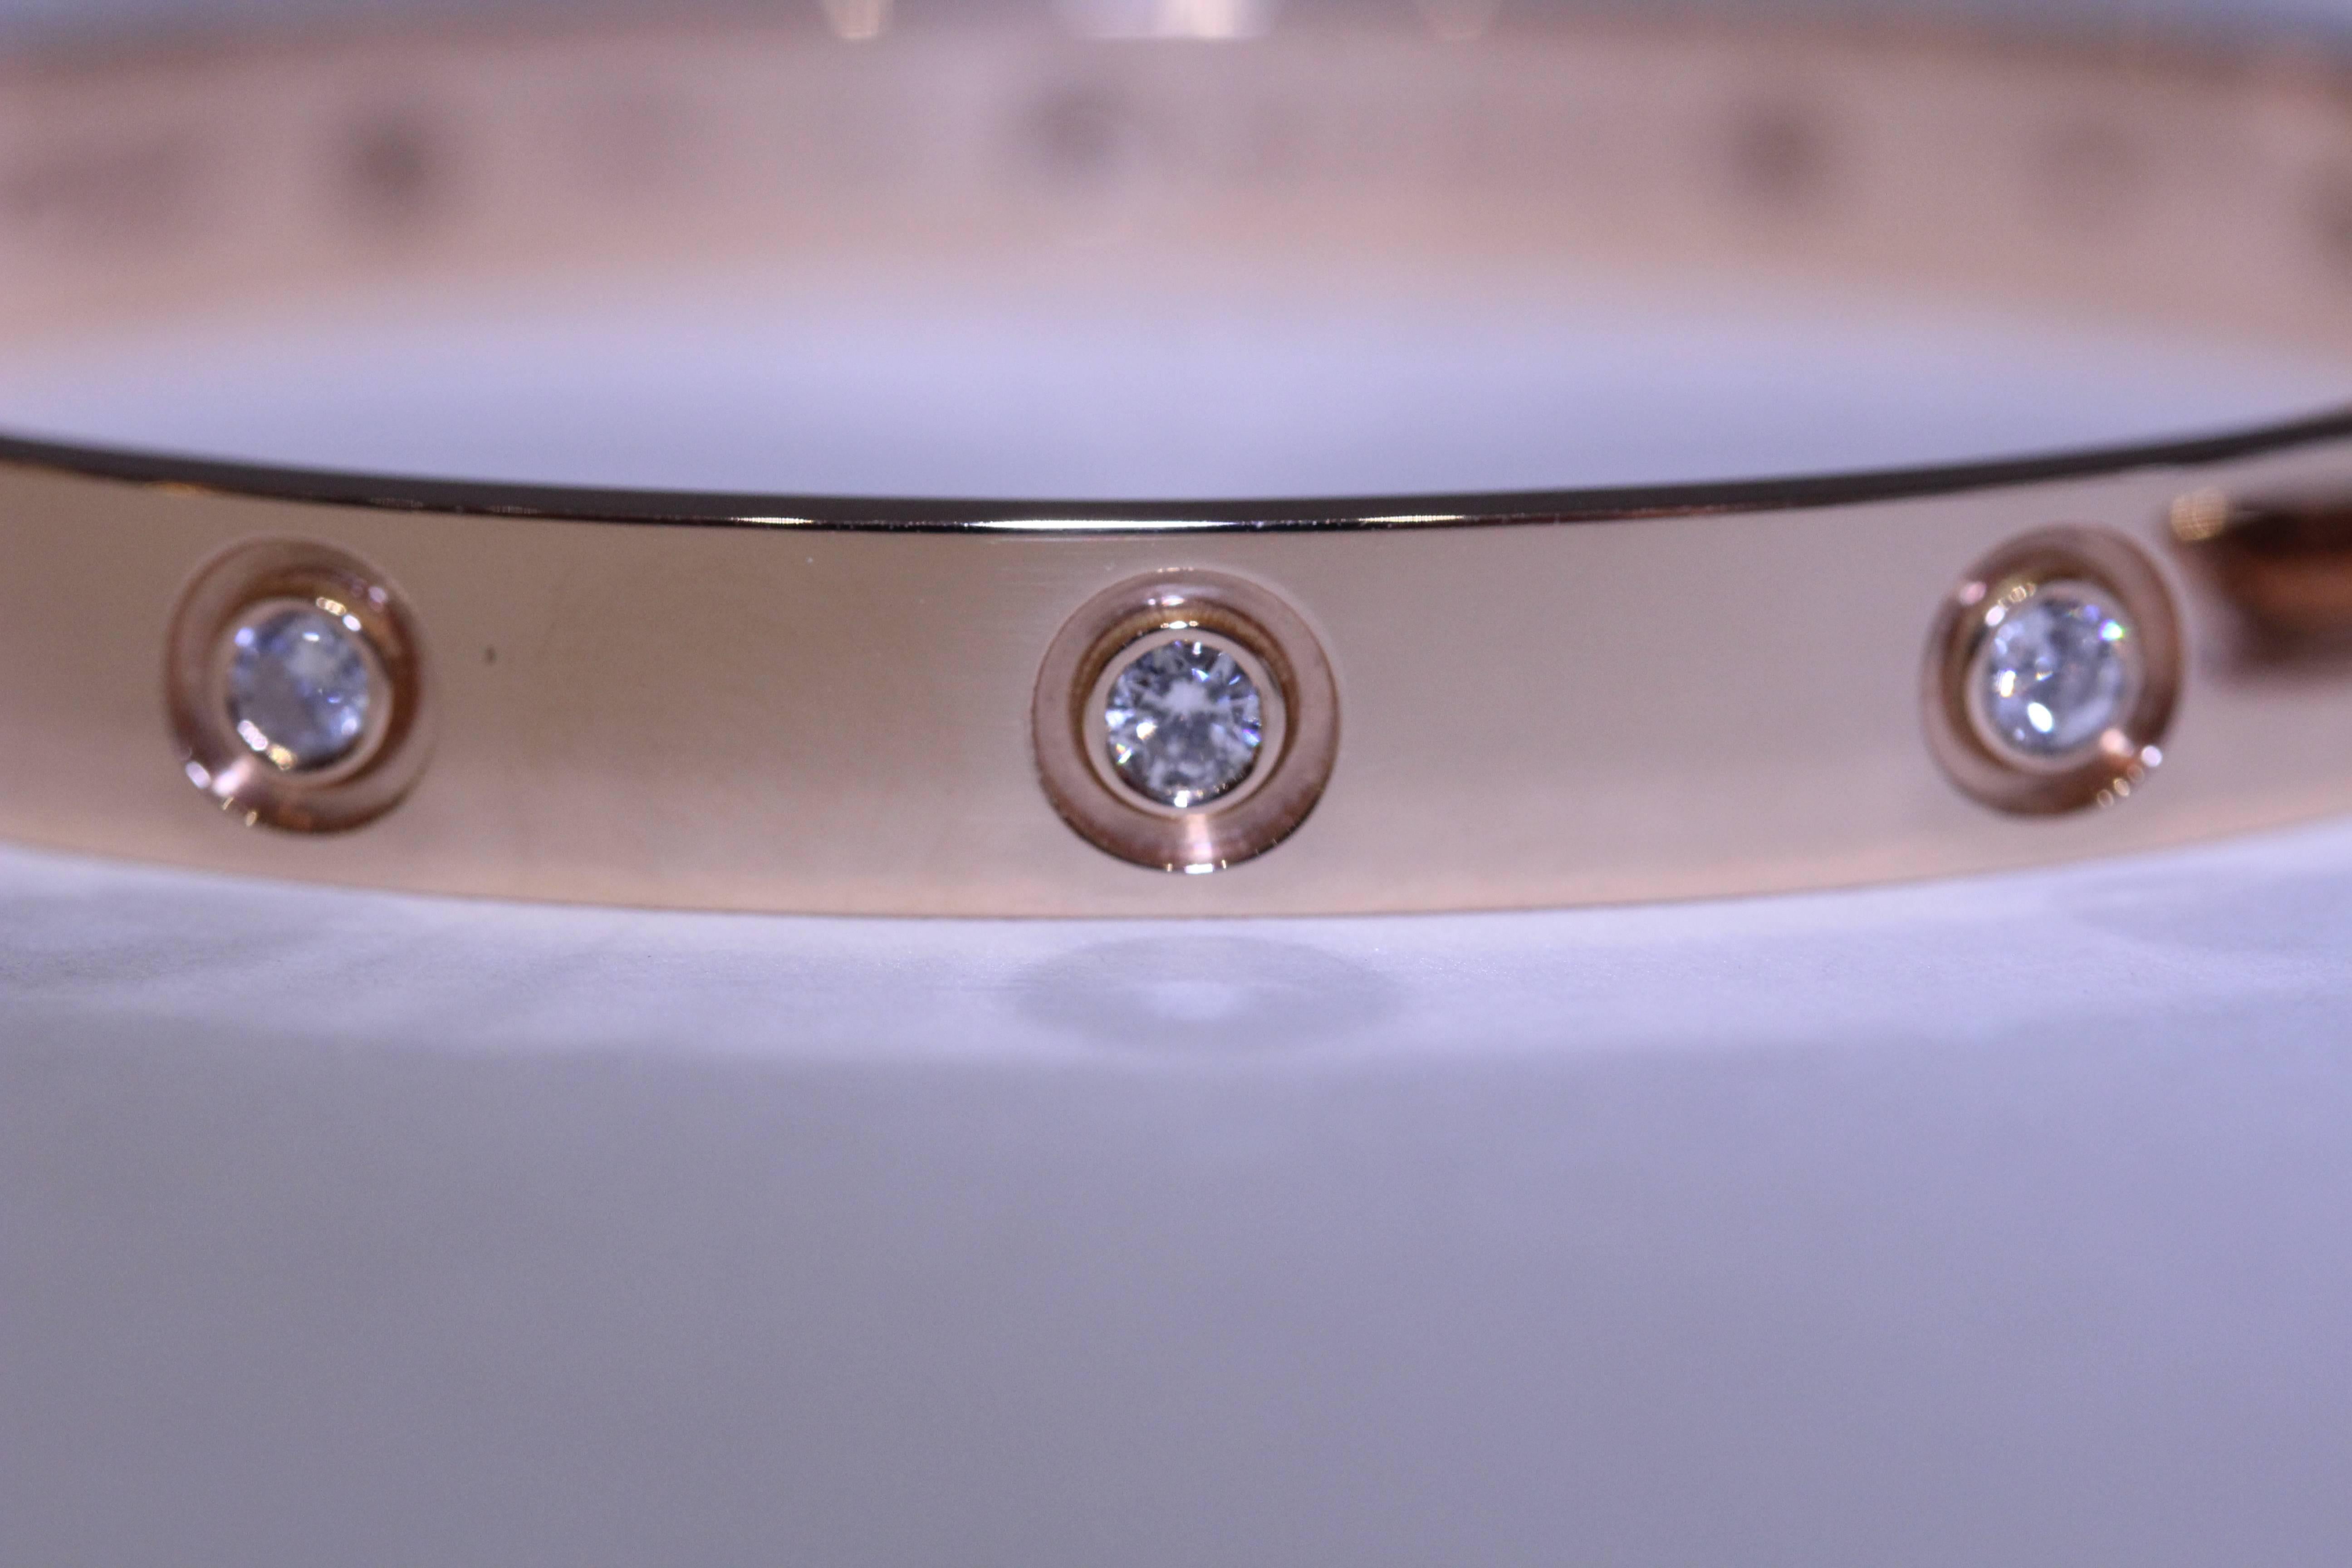 18 Karat rose gold Cartier diamond Love bracelet with 10 round diamonds. The
10 round diamonds weigh .98 total carat weight. The serial number is QP4121J2. The bracelet comes with its original box, papers and screwdriver. Size 17